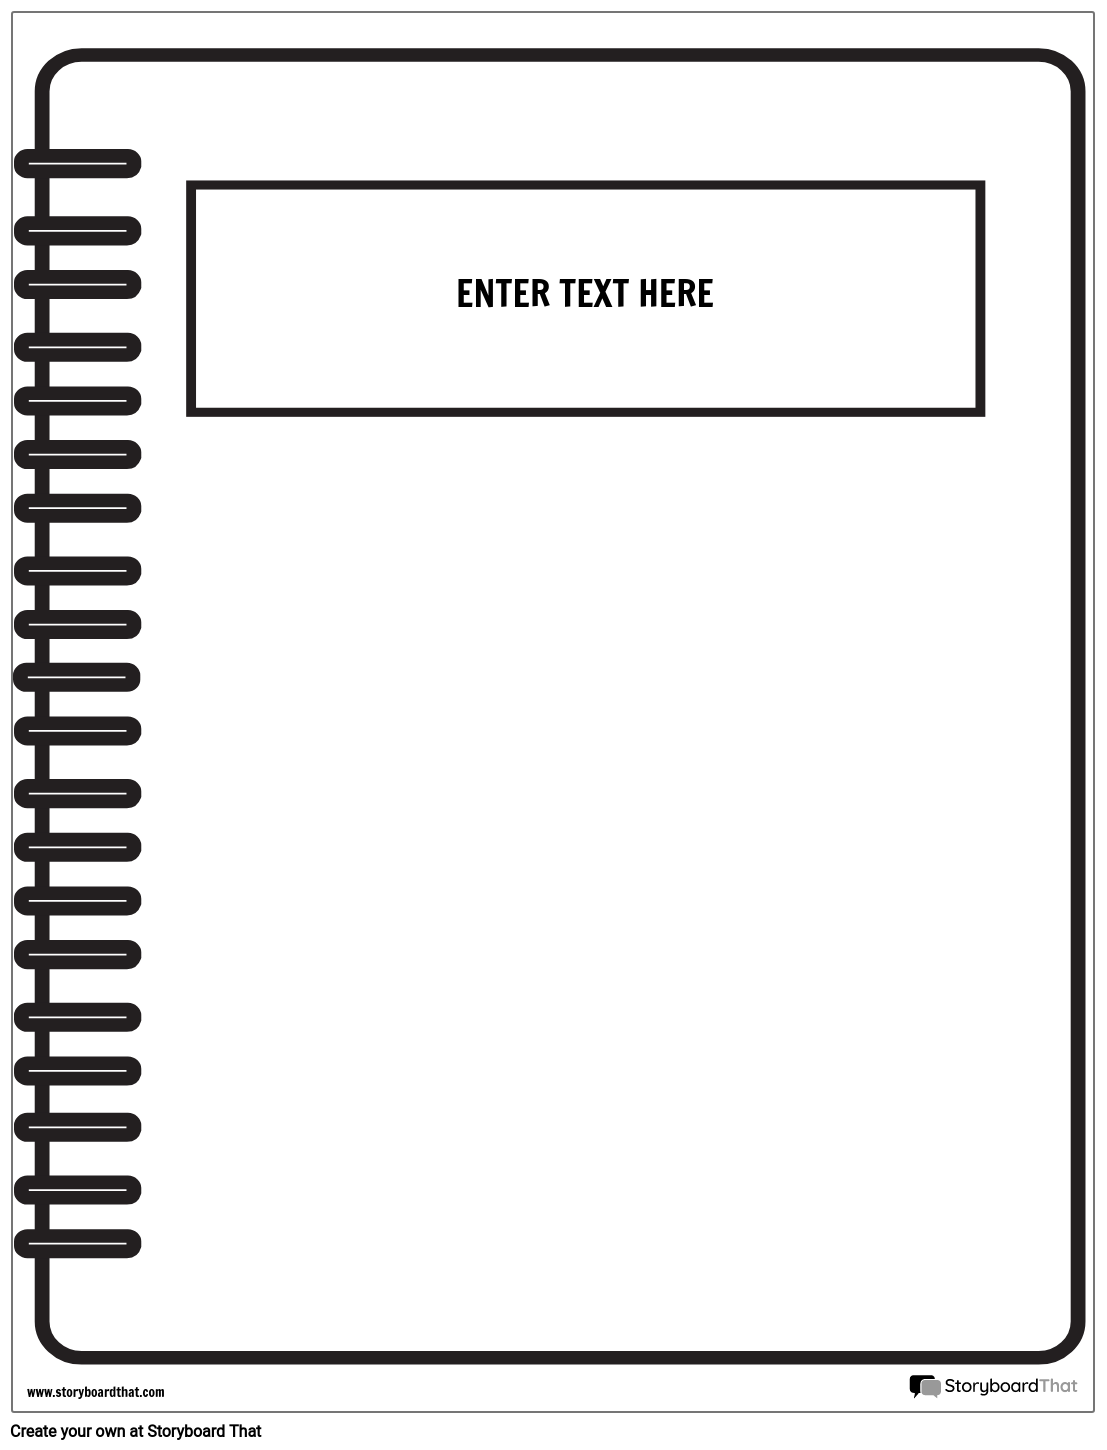 DIY Journal Cover Templates for Creative Writing Online